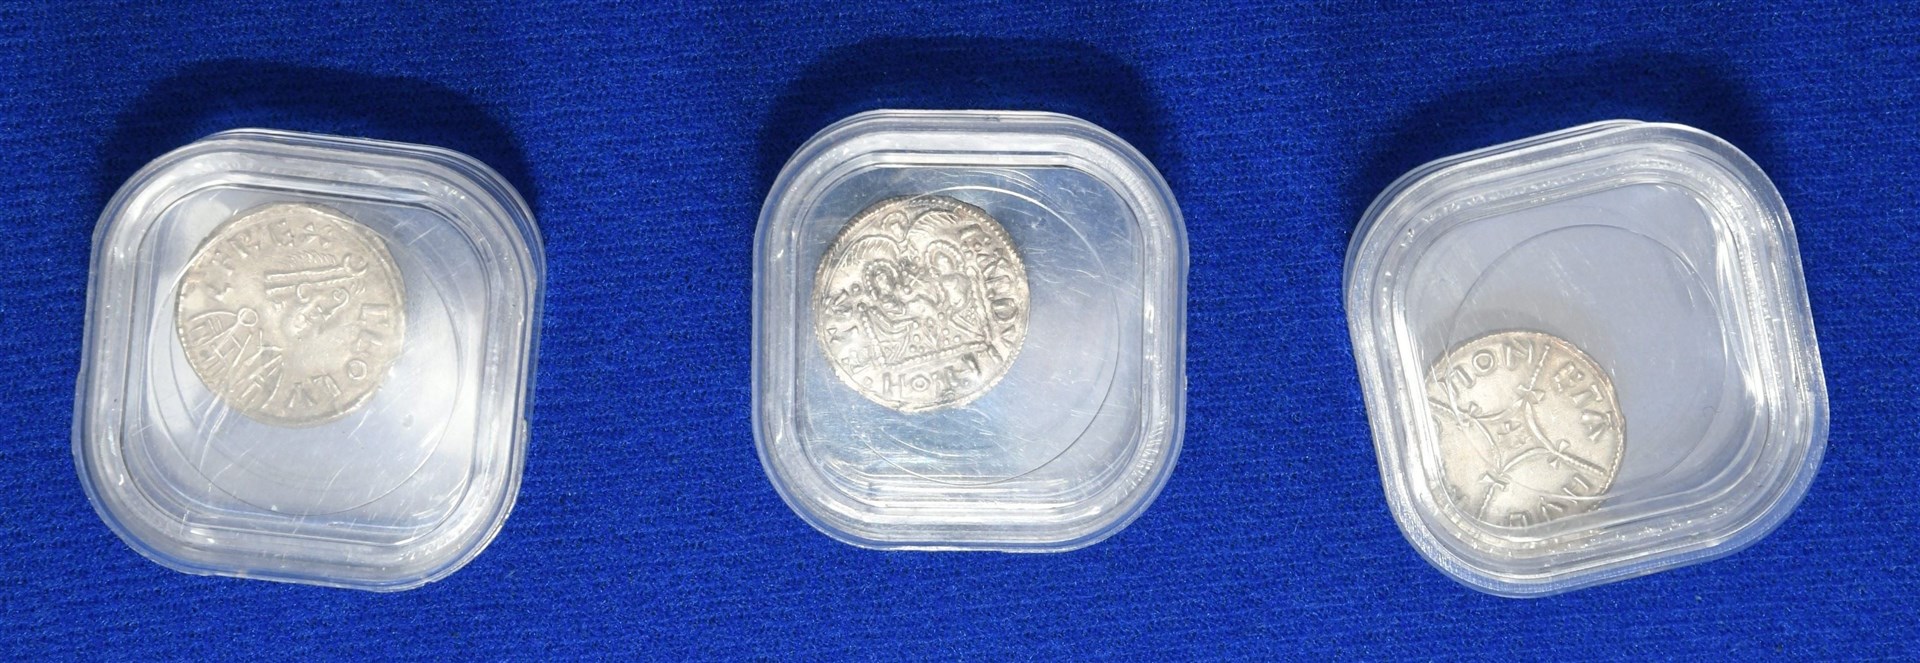 Coins which Craig Best had with him when he was arrested (Durham Police/PA)